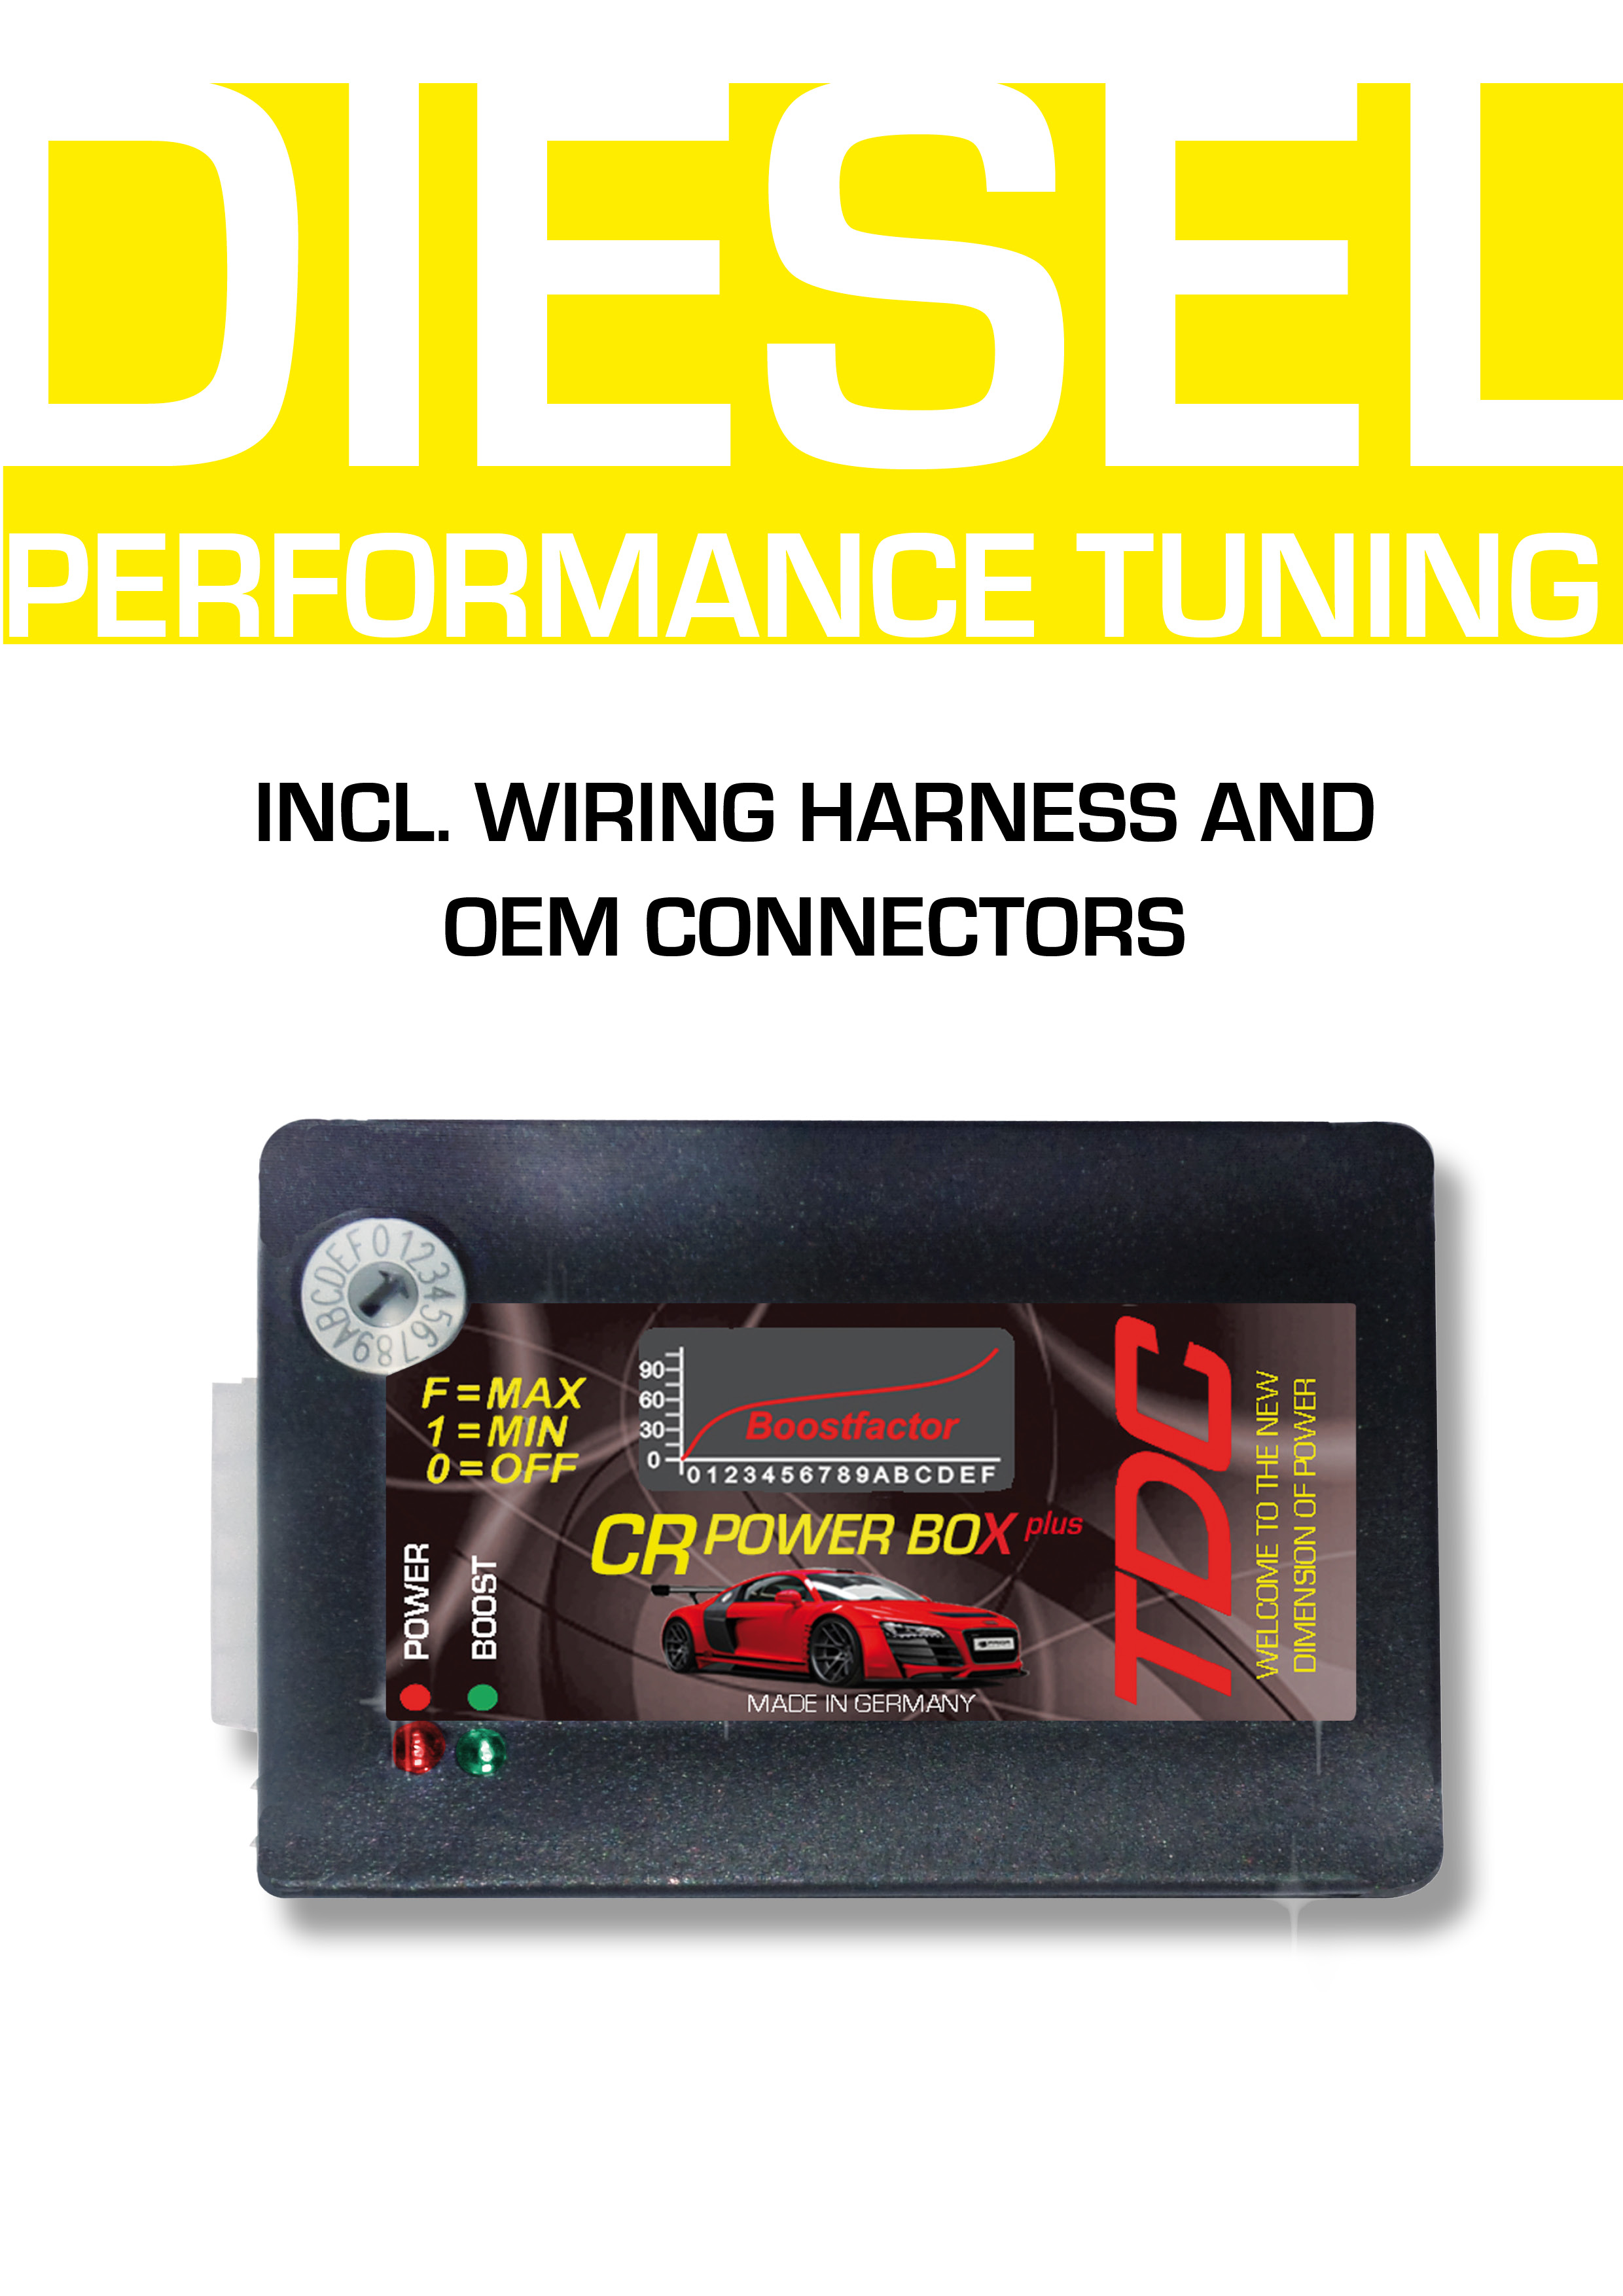 US Performance Box for TOYOTA HILUX 2.5 D-4D 106 kW 144 HP Power Chip Tuning CR1